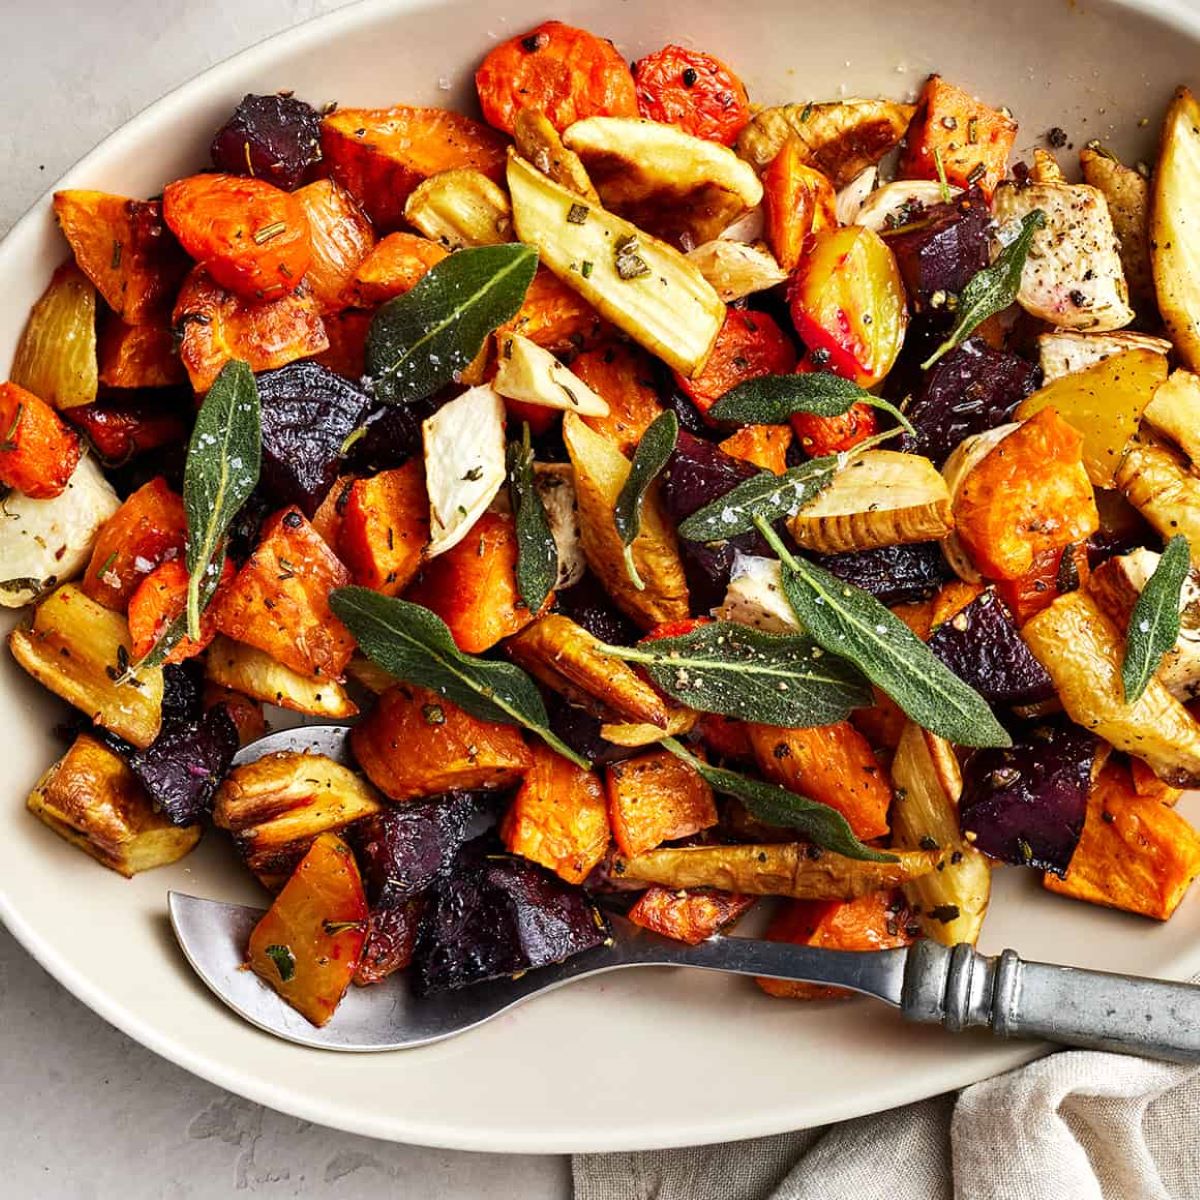 How To Roast Root Vegetables